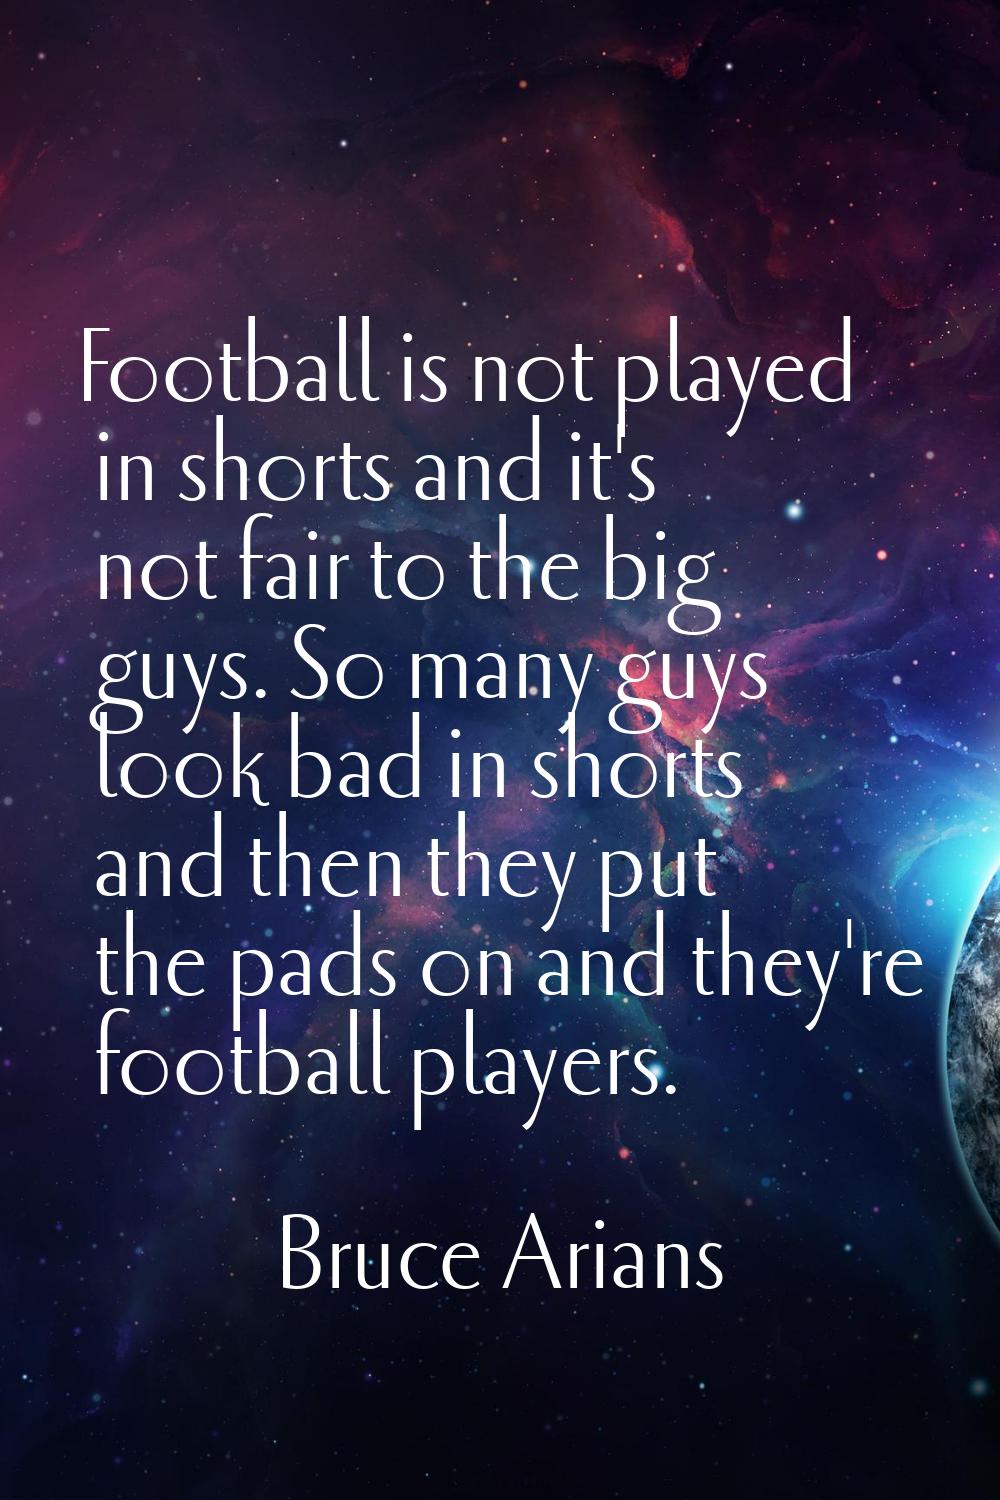 Football is not played in shorts and it's not fair to the big guys. So many guys look bad in shorts